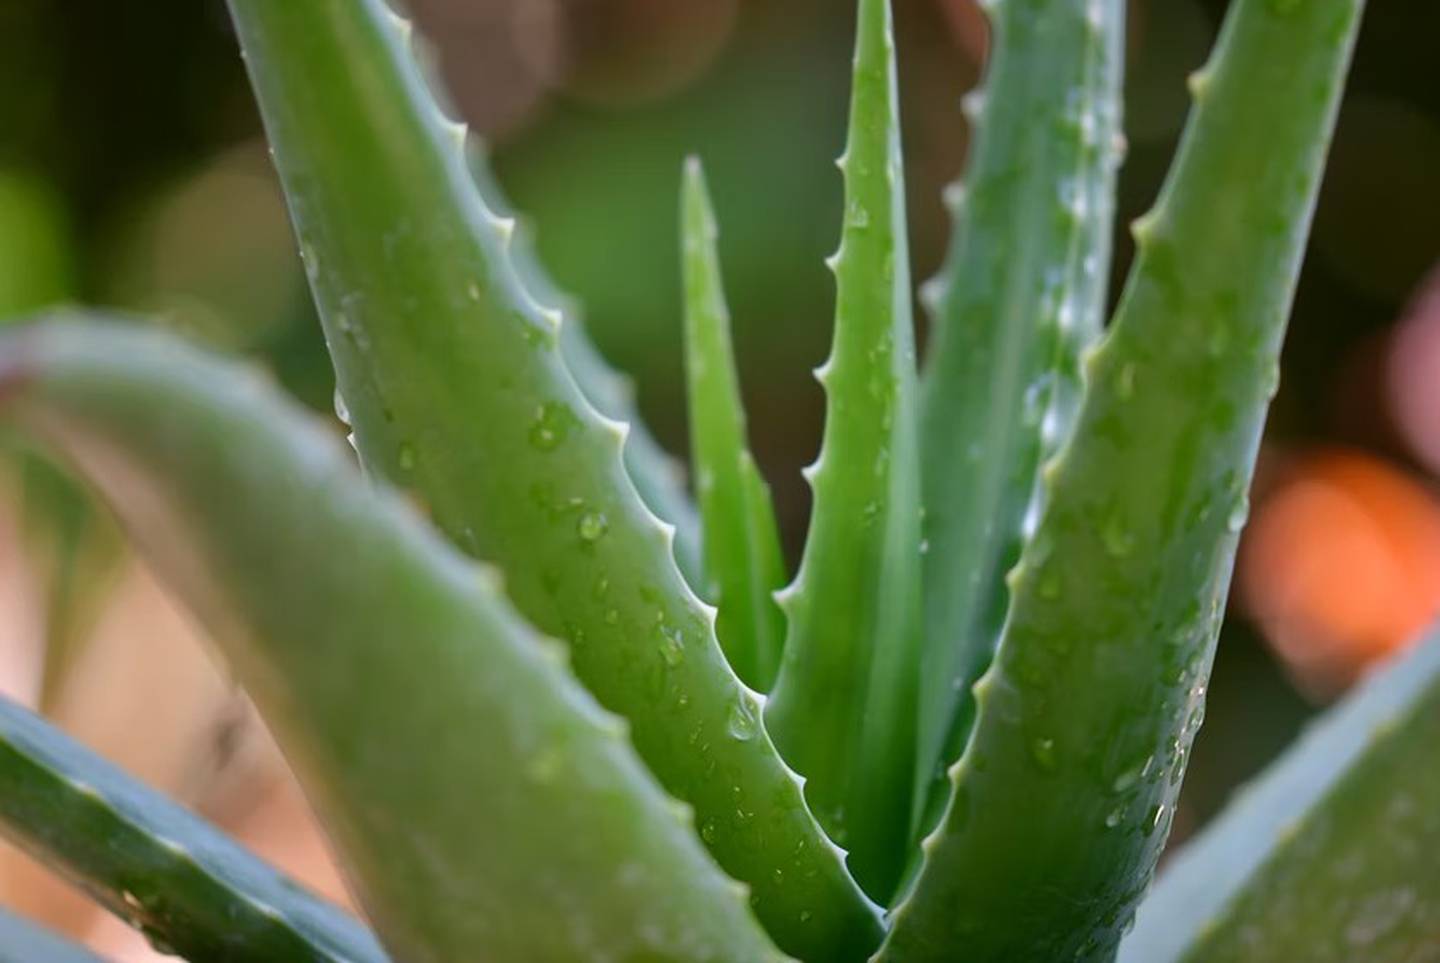 Aloe vera is very beneficial for its nutrients